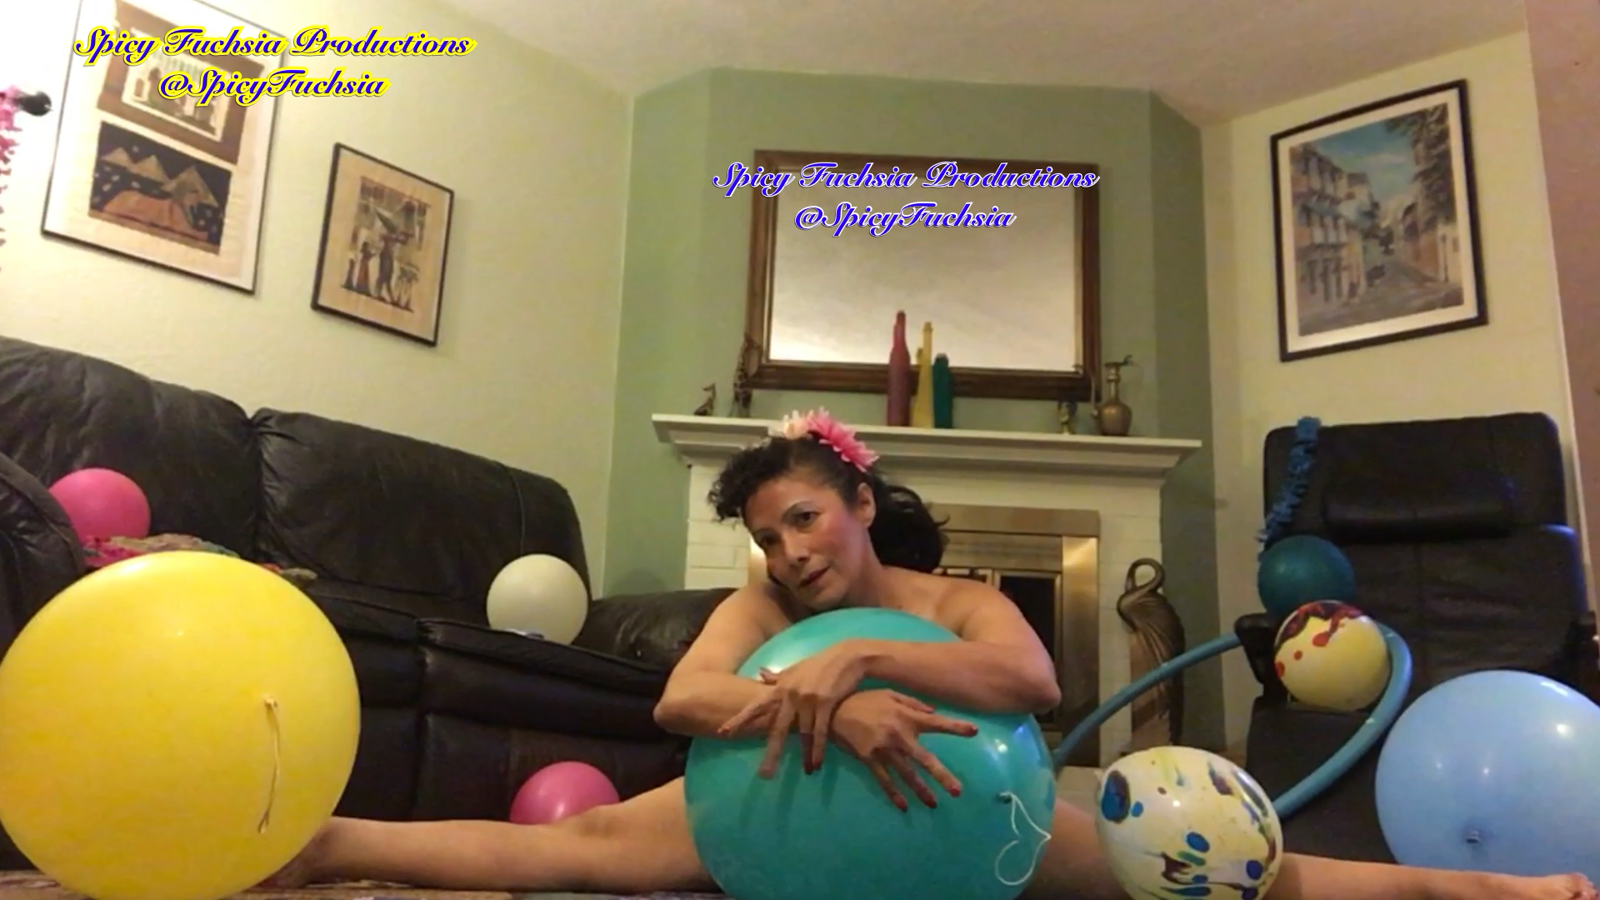 Photo by Spicy Fuchsia with the username @SpicyFuchsia, who is a star user,  August 12, 2019 at 8:05 AM. The post is about the topic Balloons and Inflatables, Non-pop